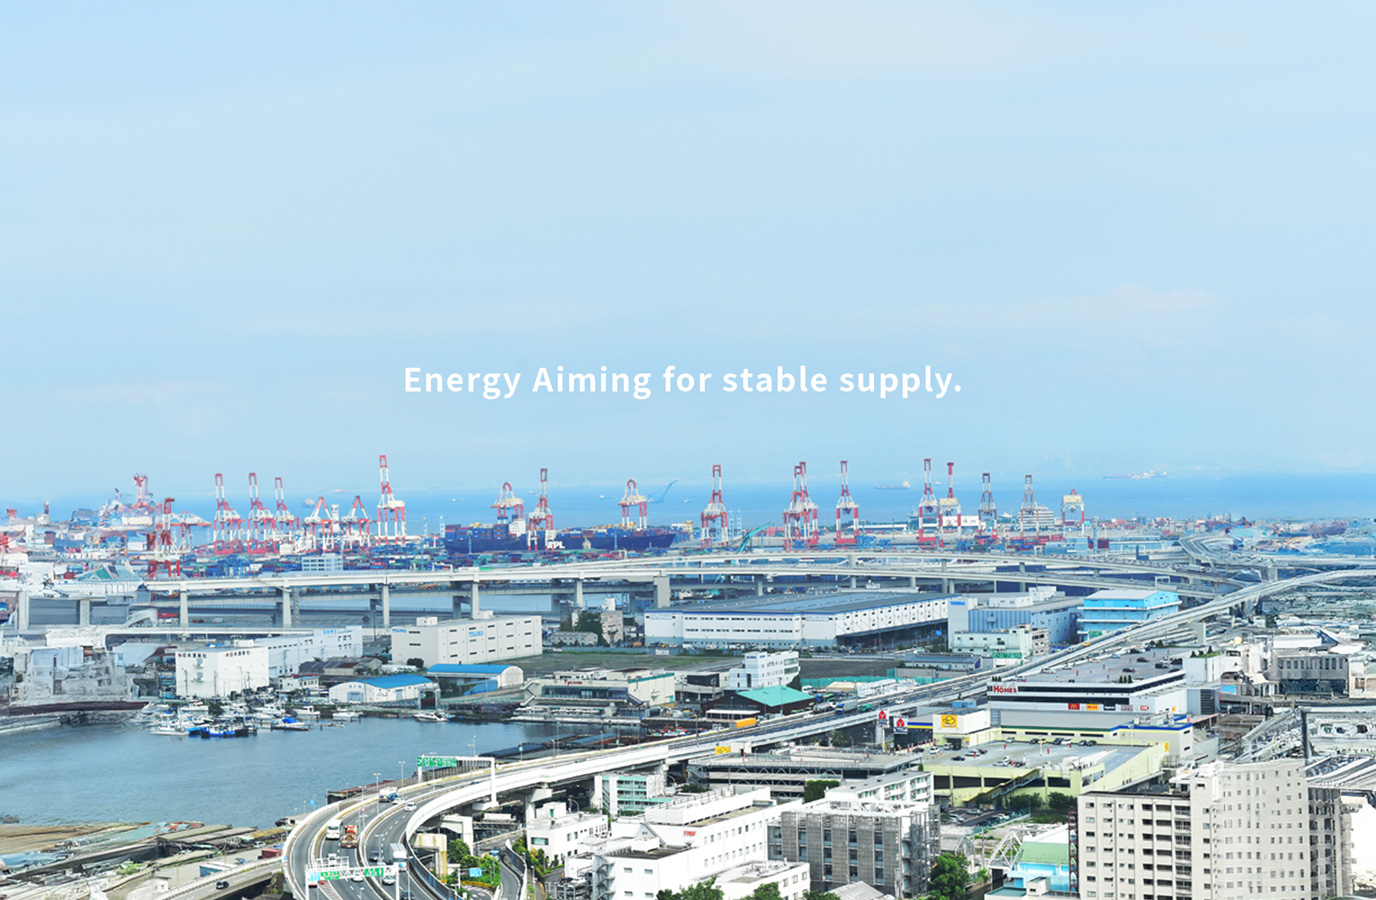 Energy Aiming for stable supply.